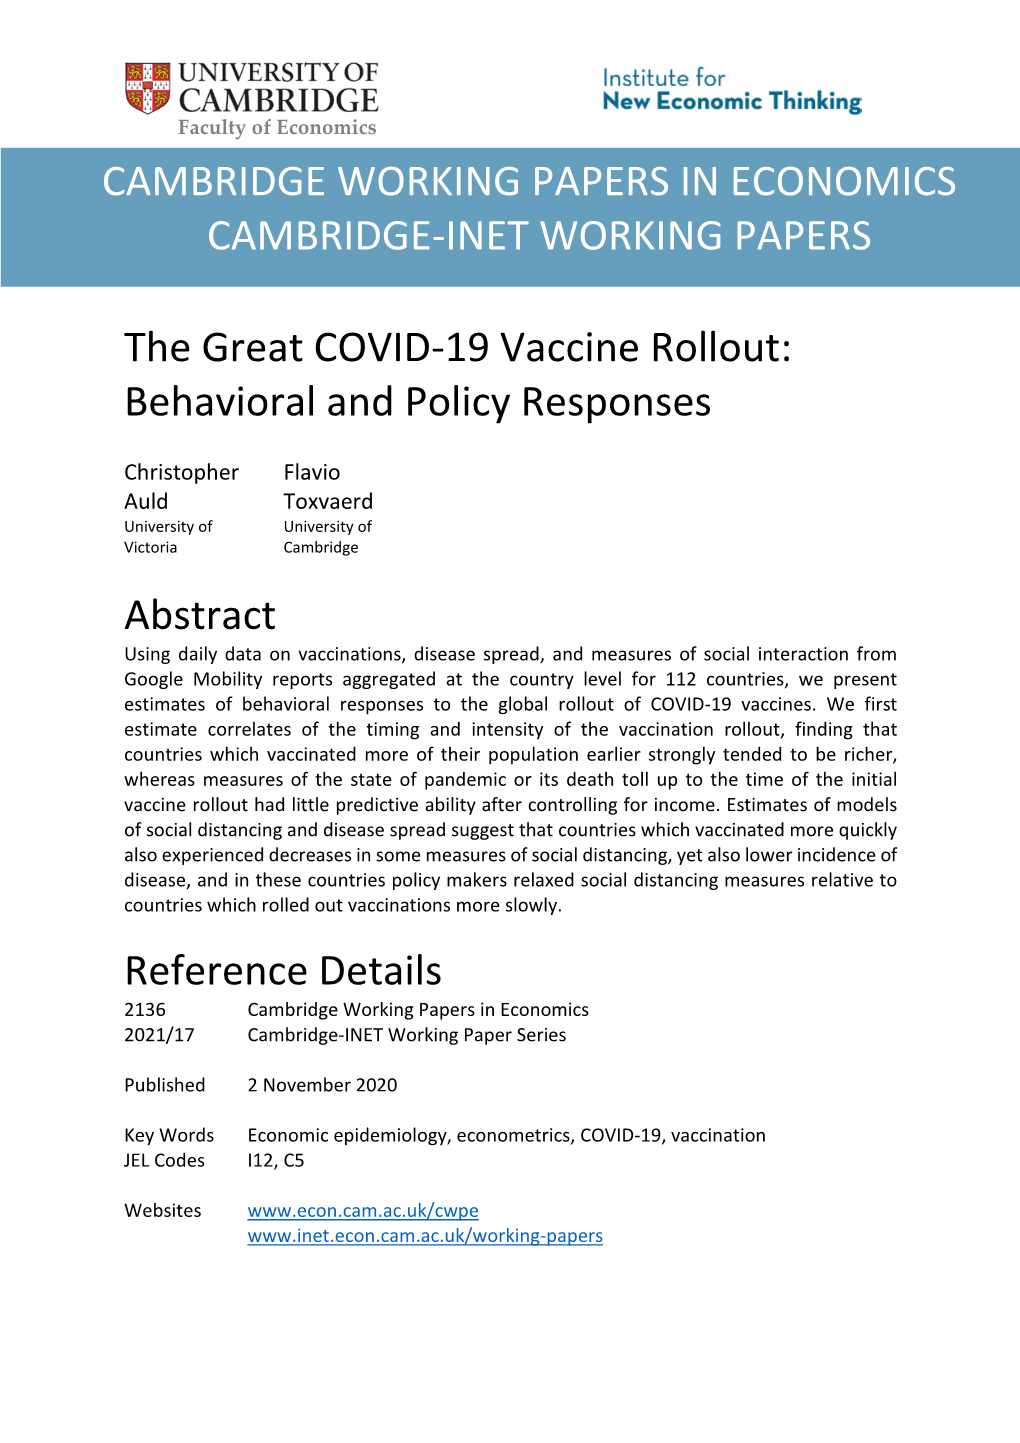 Behavioral and Policy Responses